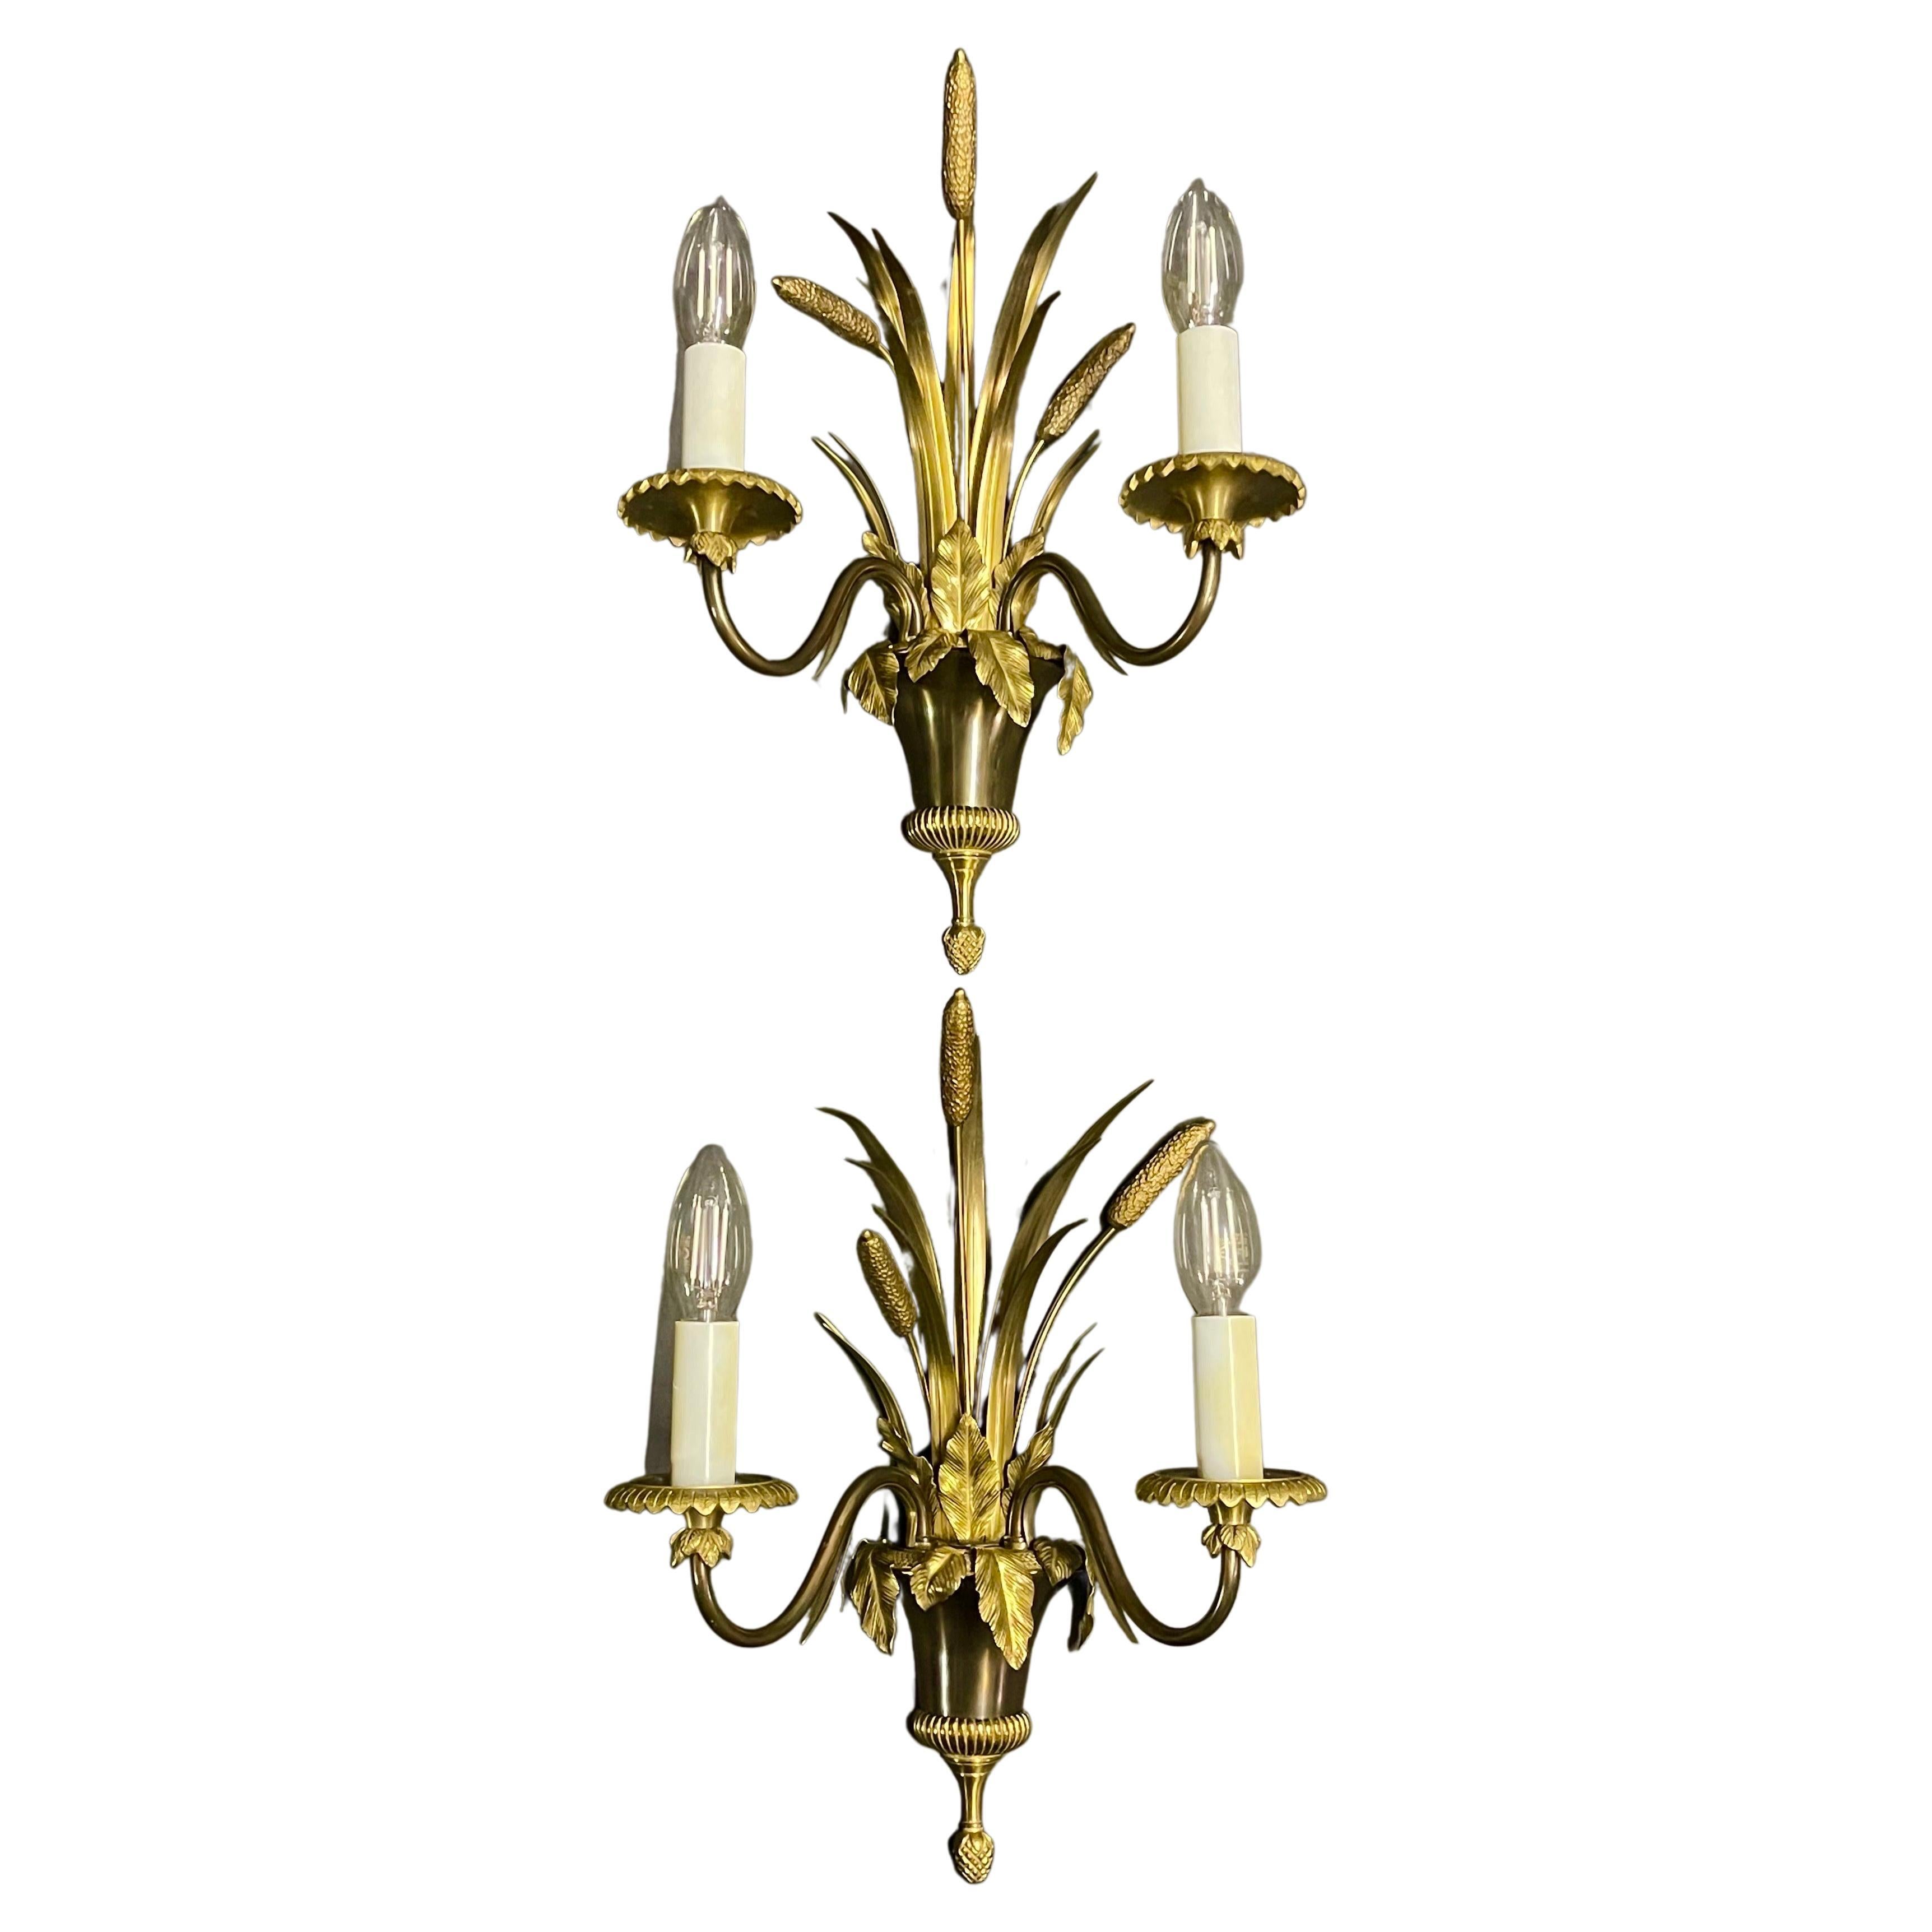 Set of three bronze light fixtures by Maison Charles, France, circa 1970s.
Socket: e14 for standard screw bulbs.
Measurements chandelier: Height 29.52 inches / Diameter 22.83 inches 
Wall sconces: Height: 14.56 inches / Width 11.22 inches / Depth